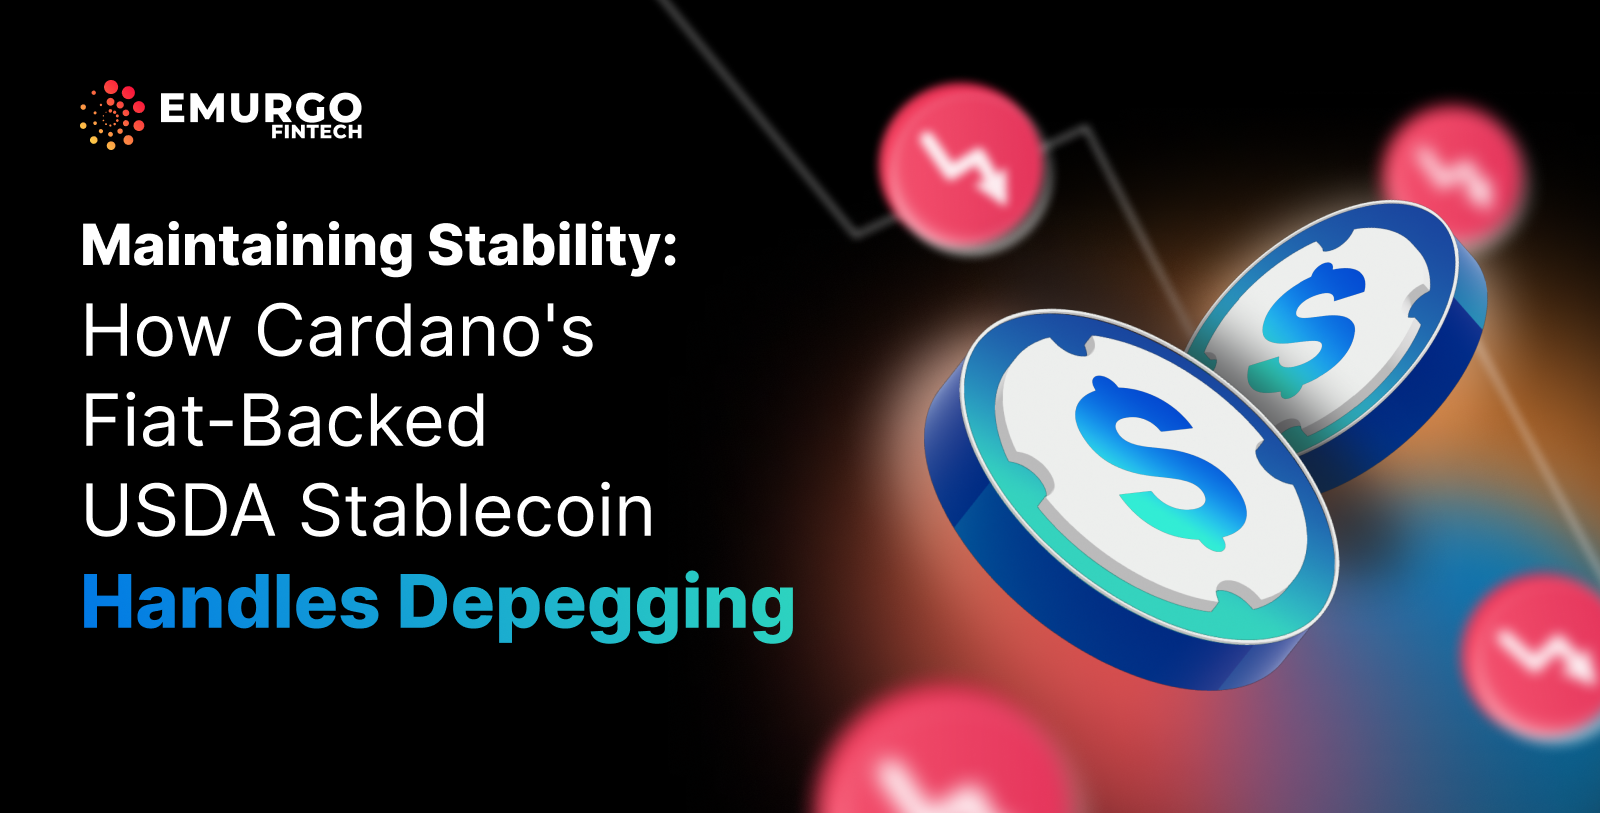 Maintaining-Stability_How-Cardanos-Fiat-Backed-USDA-Stablecoin-Handles-Depegging2023.png